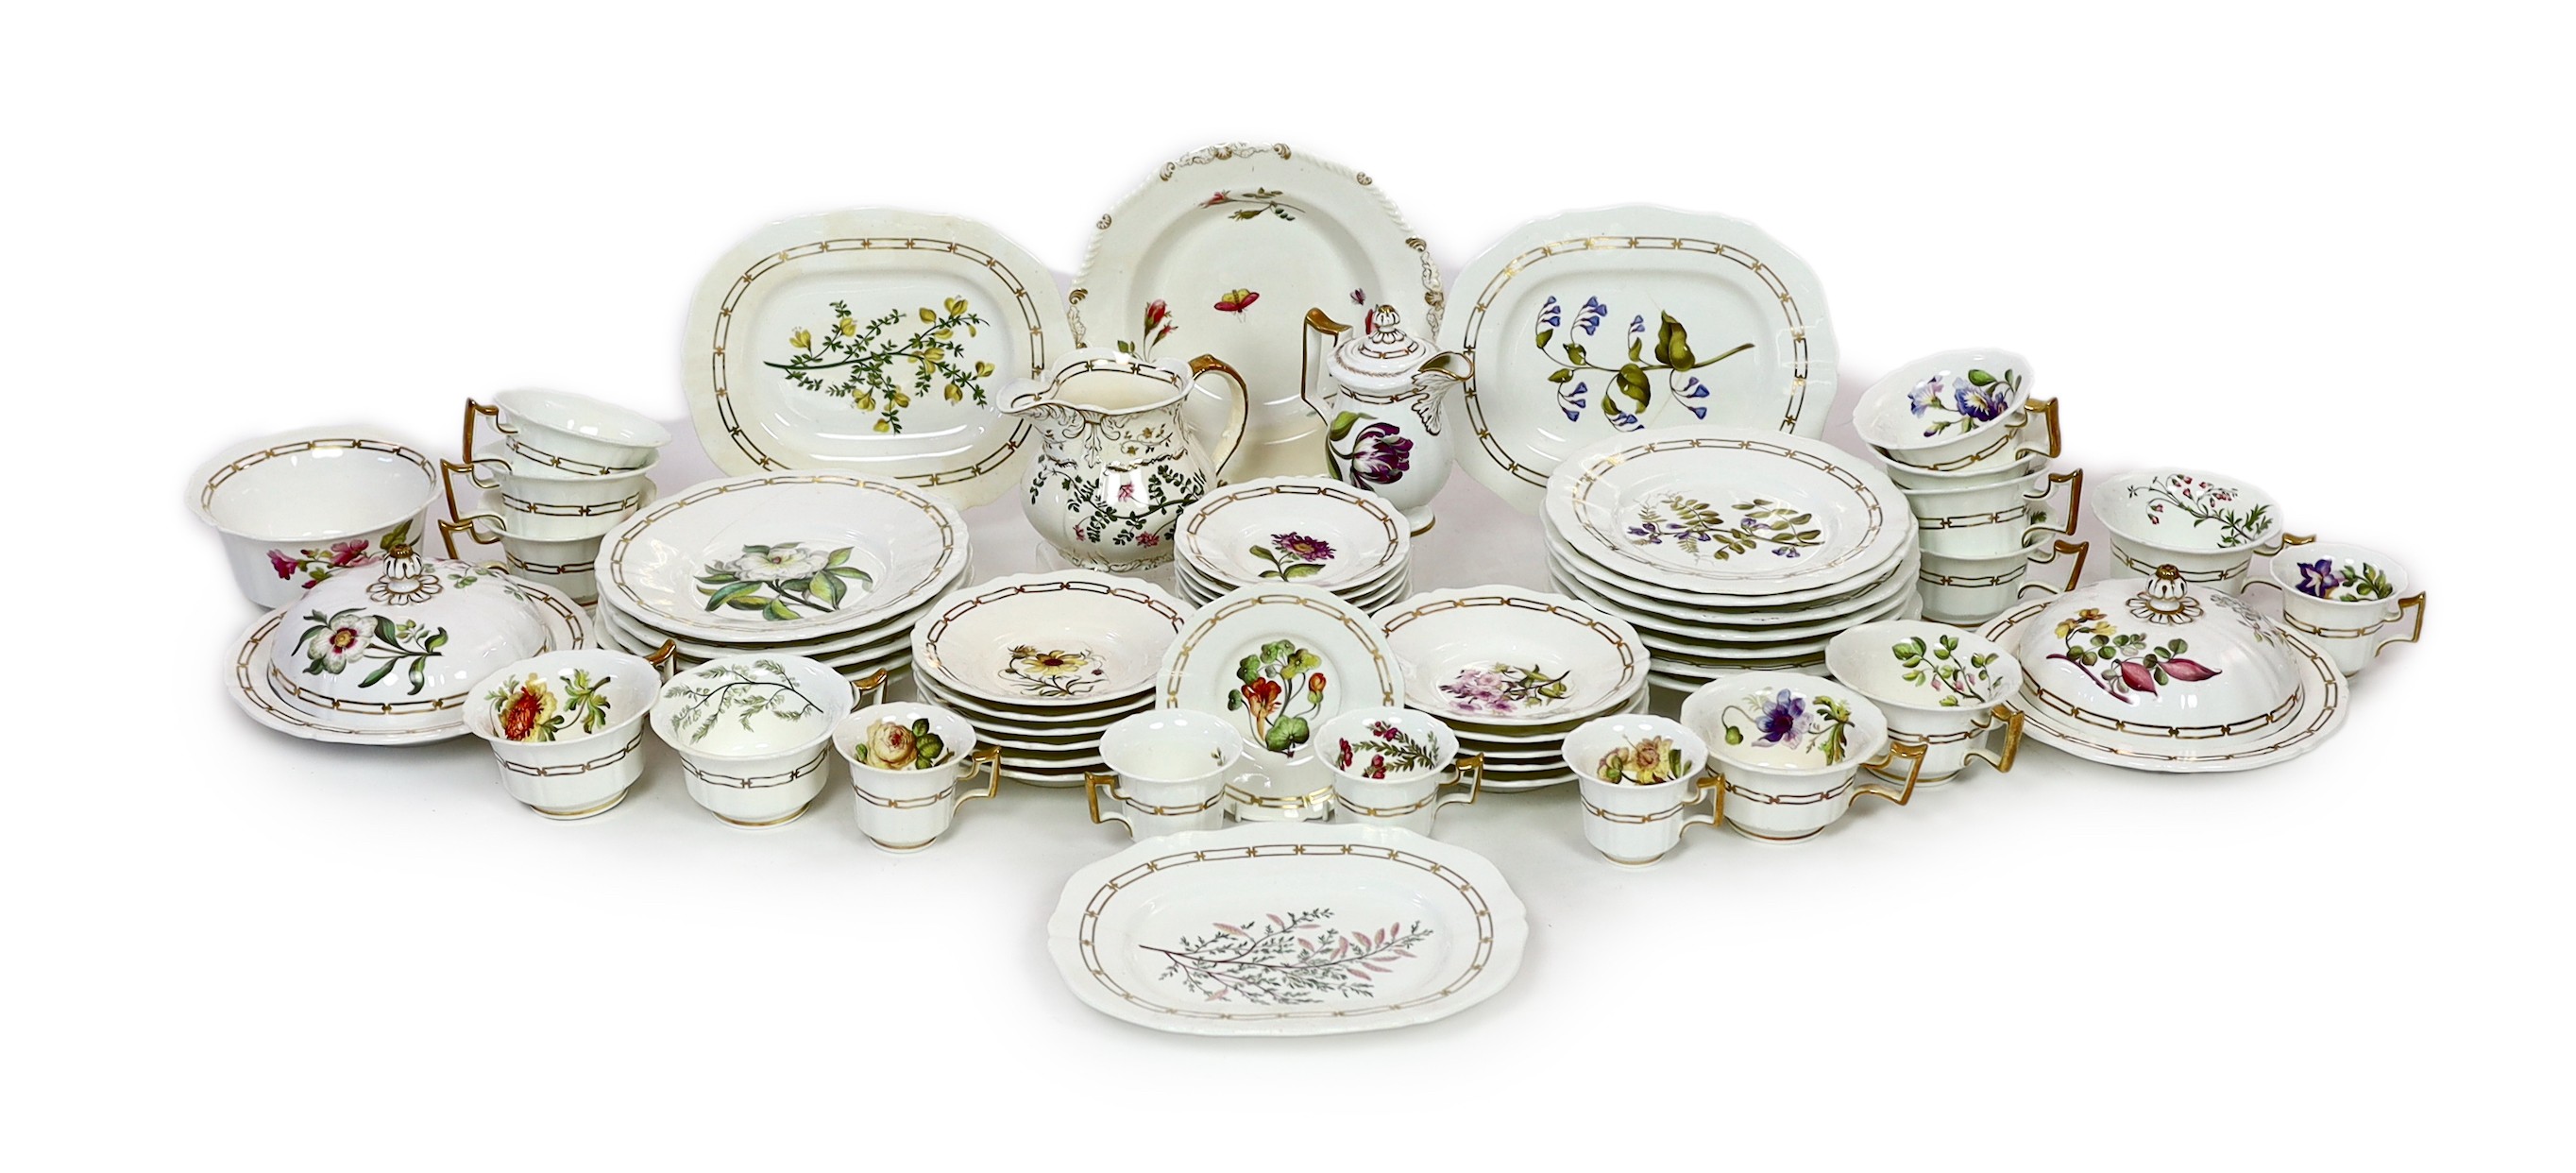 A rare Rockingham botanical specimen part breakfast service, griffin statant mark, c.1826, with some matching pieces, c.1830-5                                                                                              